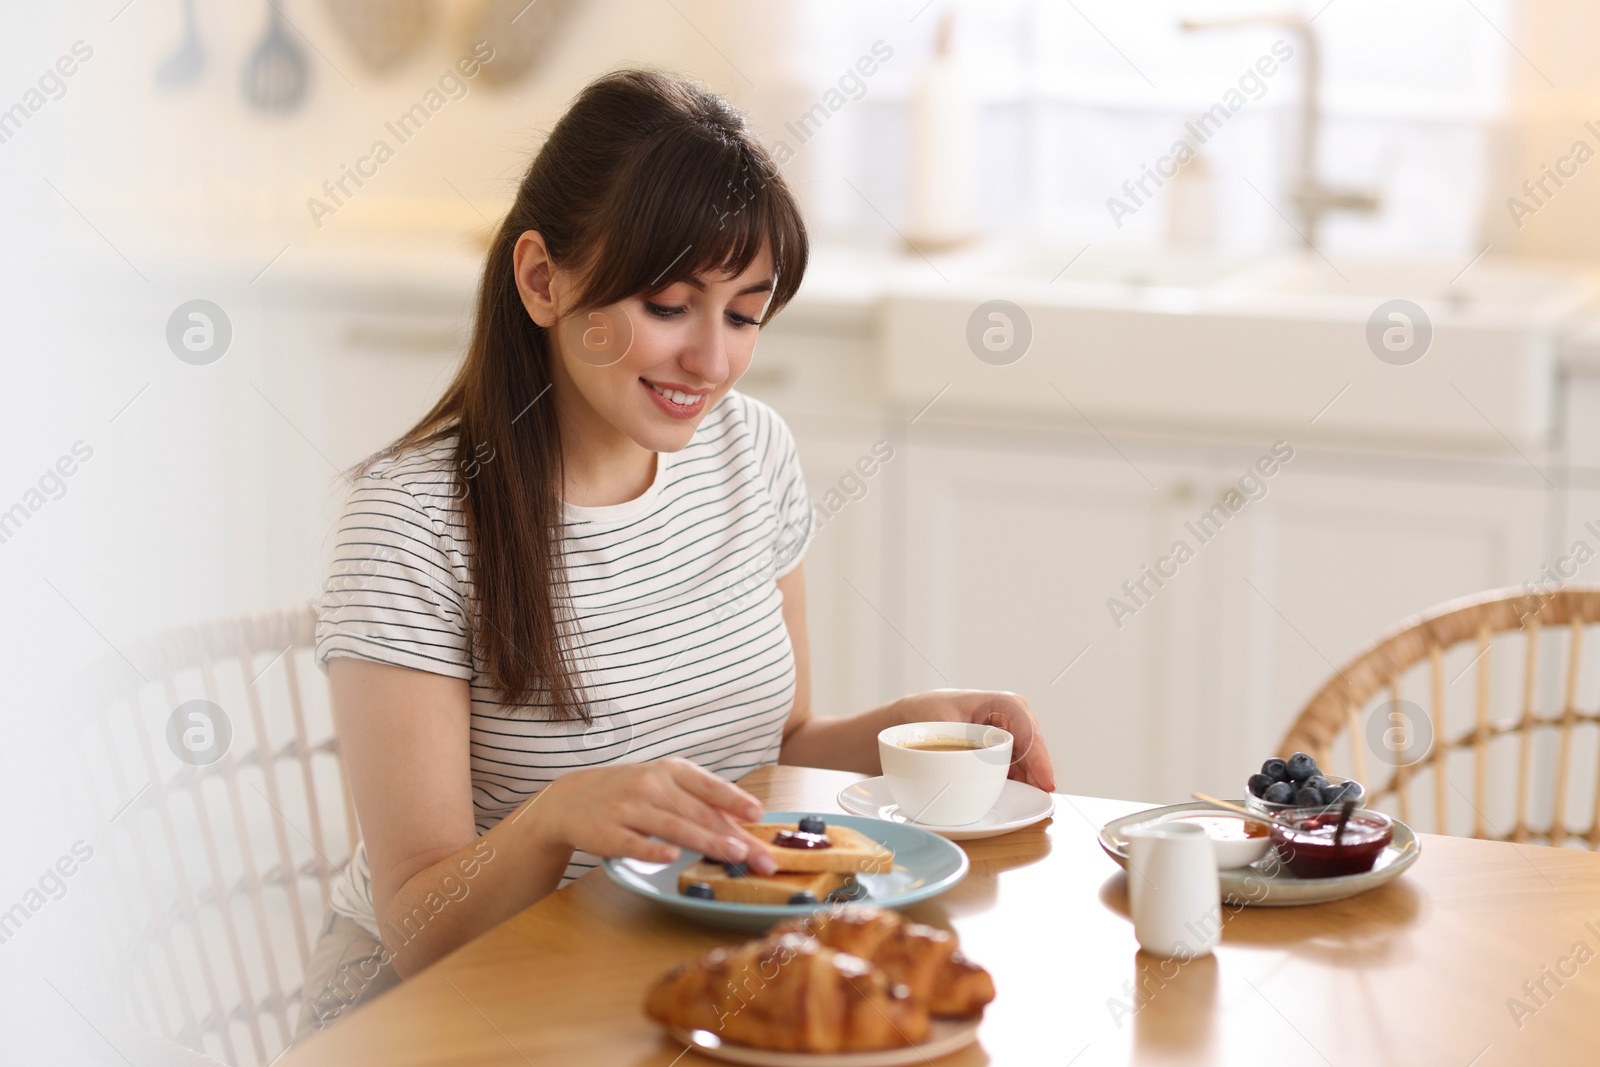 Photo of Smiling woman eating tasty breakfast at table indoors